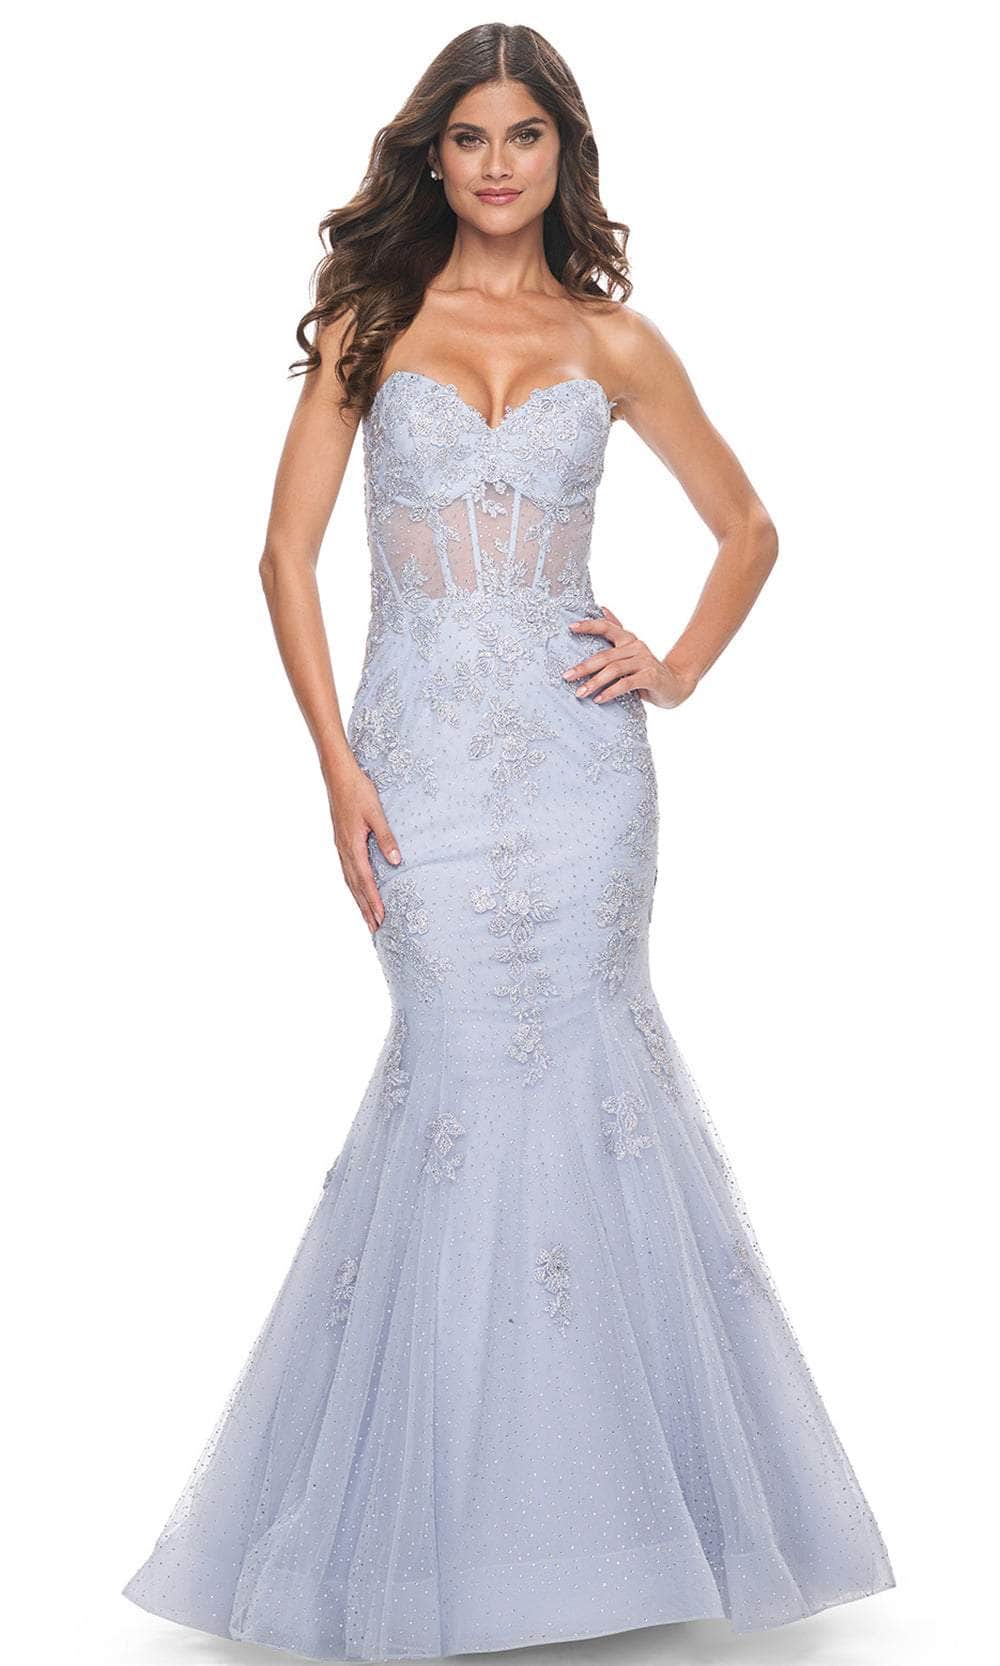 Image of La Femme 32214 - Sweetheart Illusion Waist Prom Gown